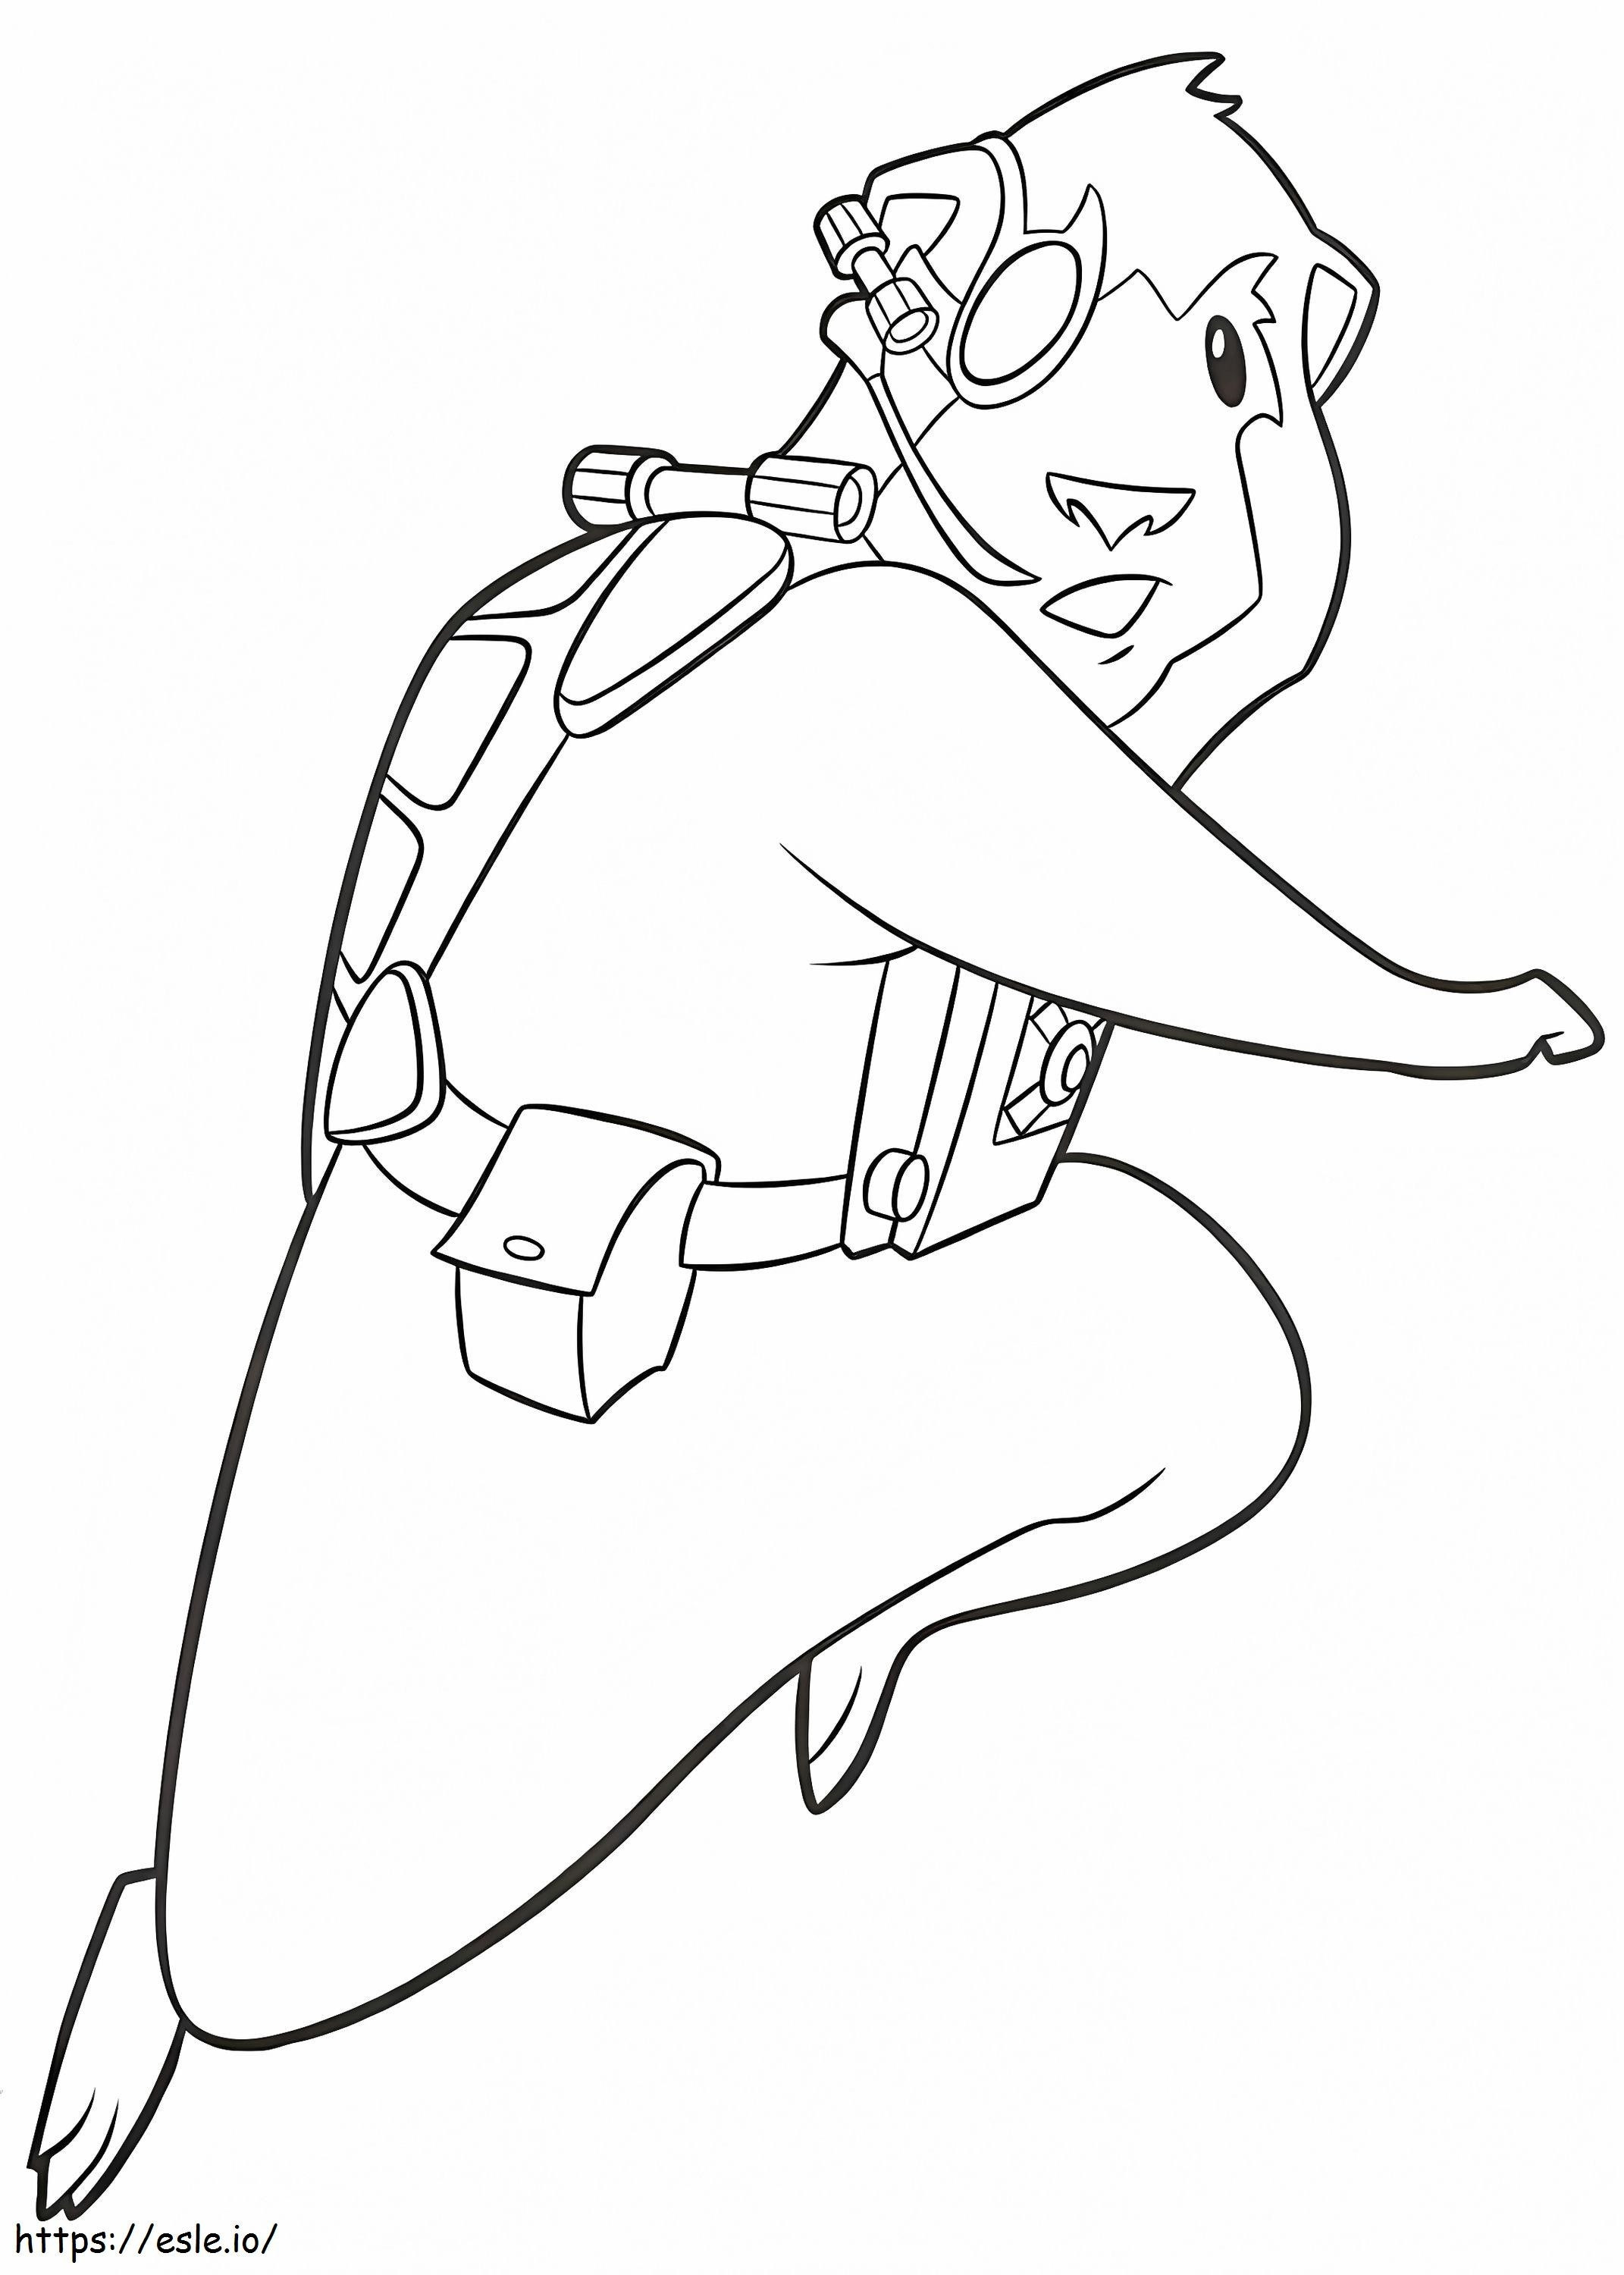 1535704055 Blaster A4 coloring page